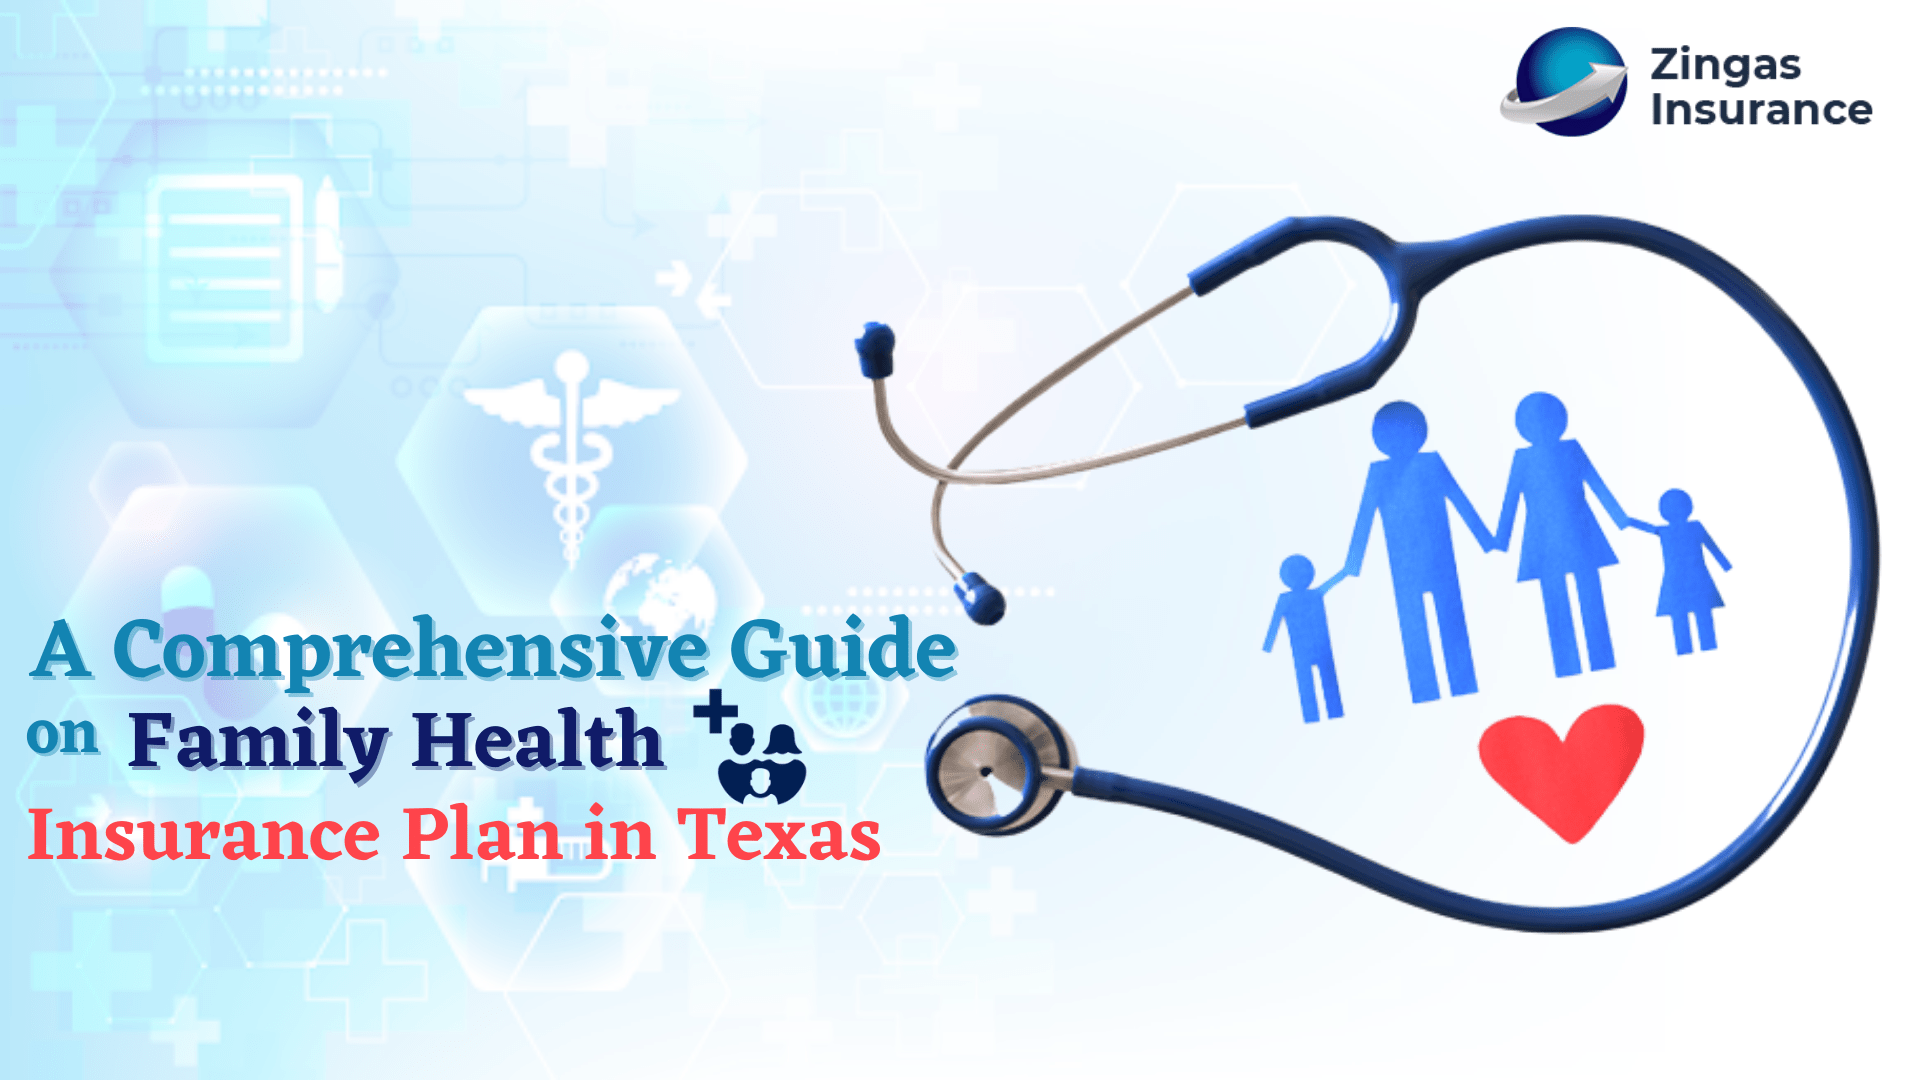 A Comprehensive Guide on Family Health Insurance Plan in Texas